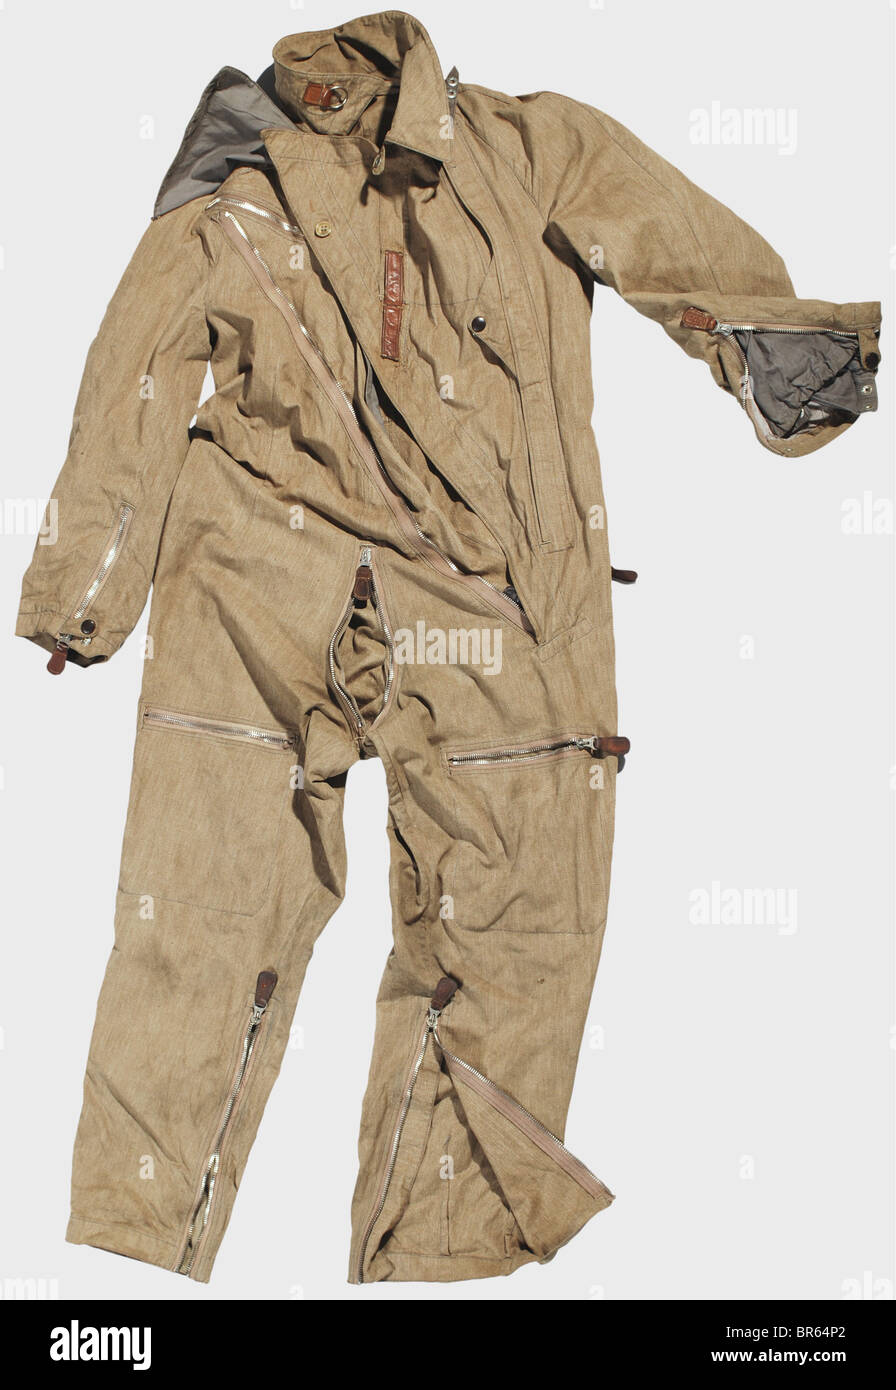 A special summer flying suit for a Luftwaffe bomber crew., An early model LKp W100 flying helmet of sand-coloured linen with brown leather trim, plastic earphone shells, three point attachment for an oxygen mask, separate communications system with twin throat microphones in series, and two connector cables with quick release connectors. Stamped '10. Staffel' (10th Squadron). Protective goggles with adjustable bridge and permanent 'soft' lenses (damaged). A sand-coloured linen flying suit with diagonal zippers, Prym snaps, and Rheinnadel zippers (one defective), Stock Photo